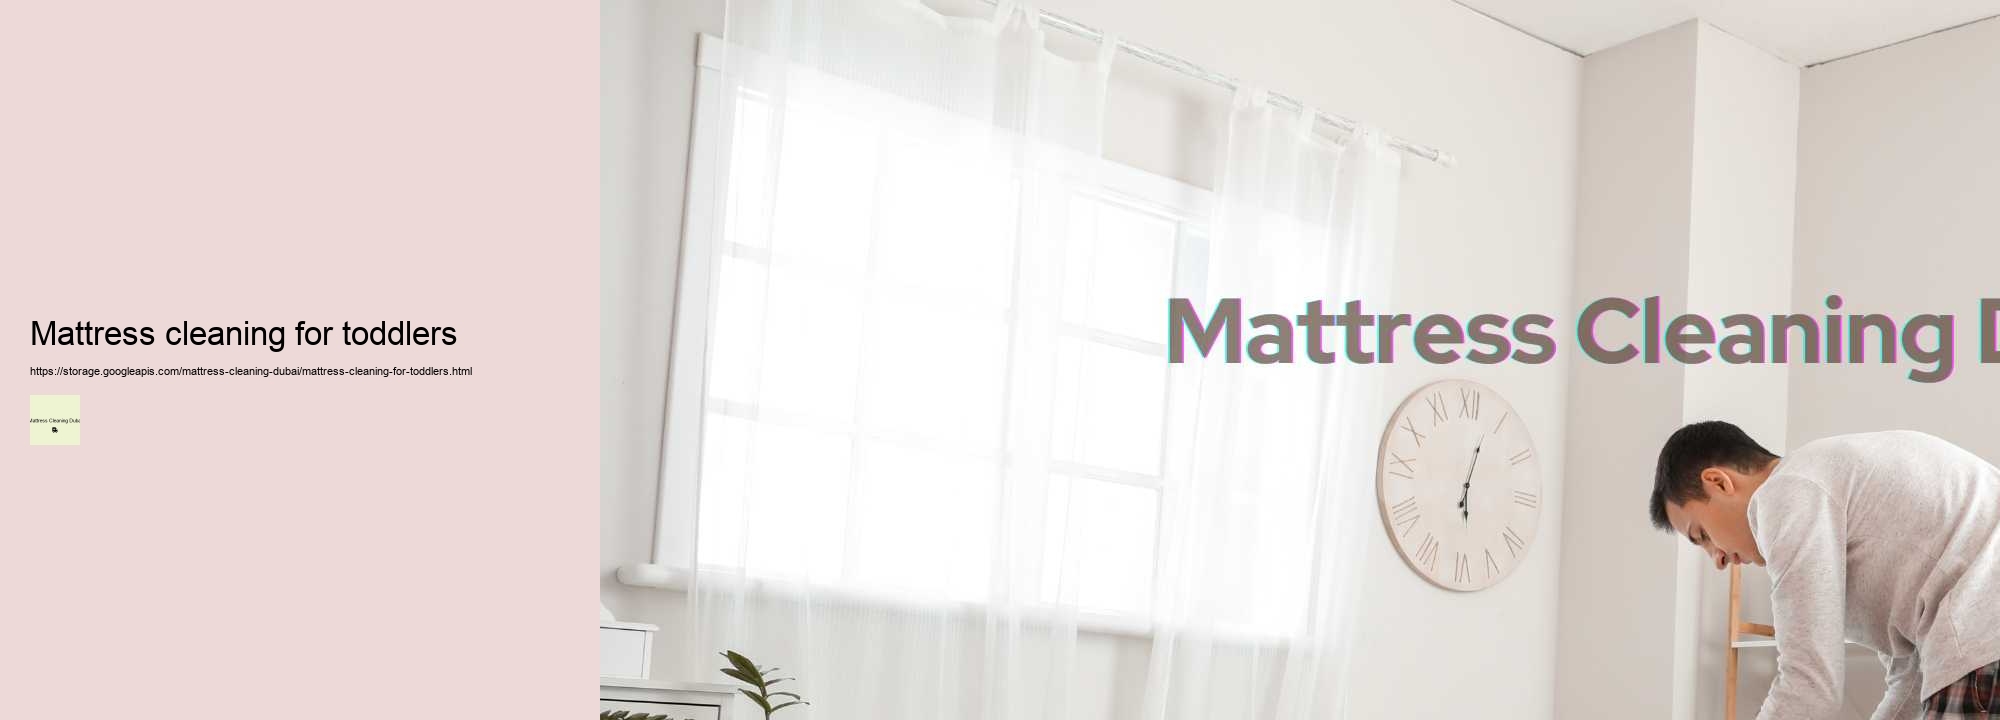 Mattress cleaning for toddlers